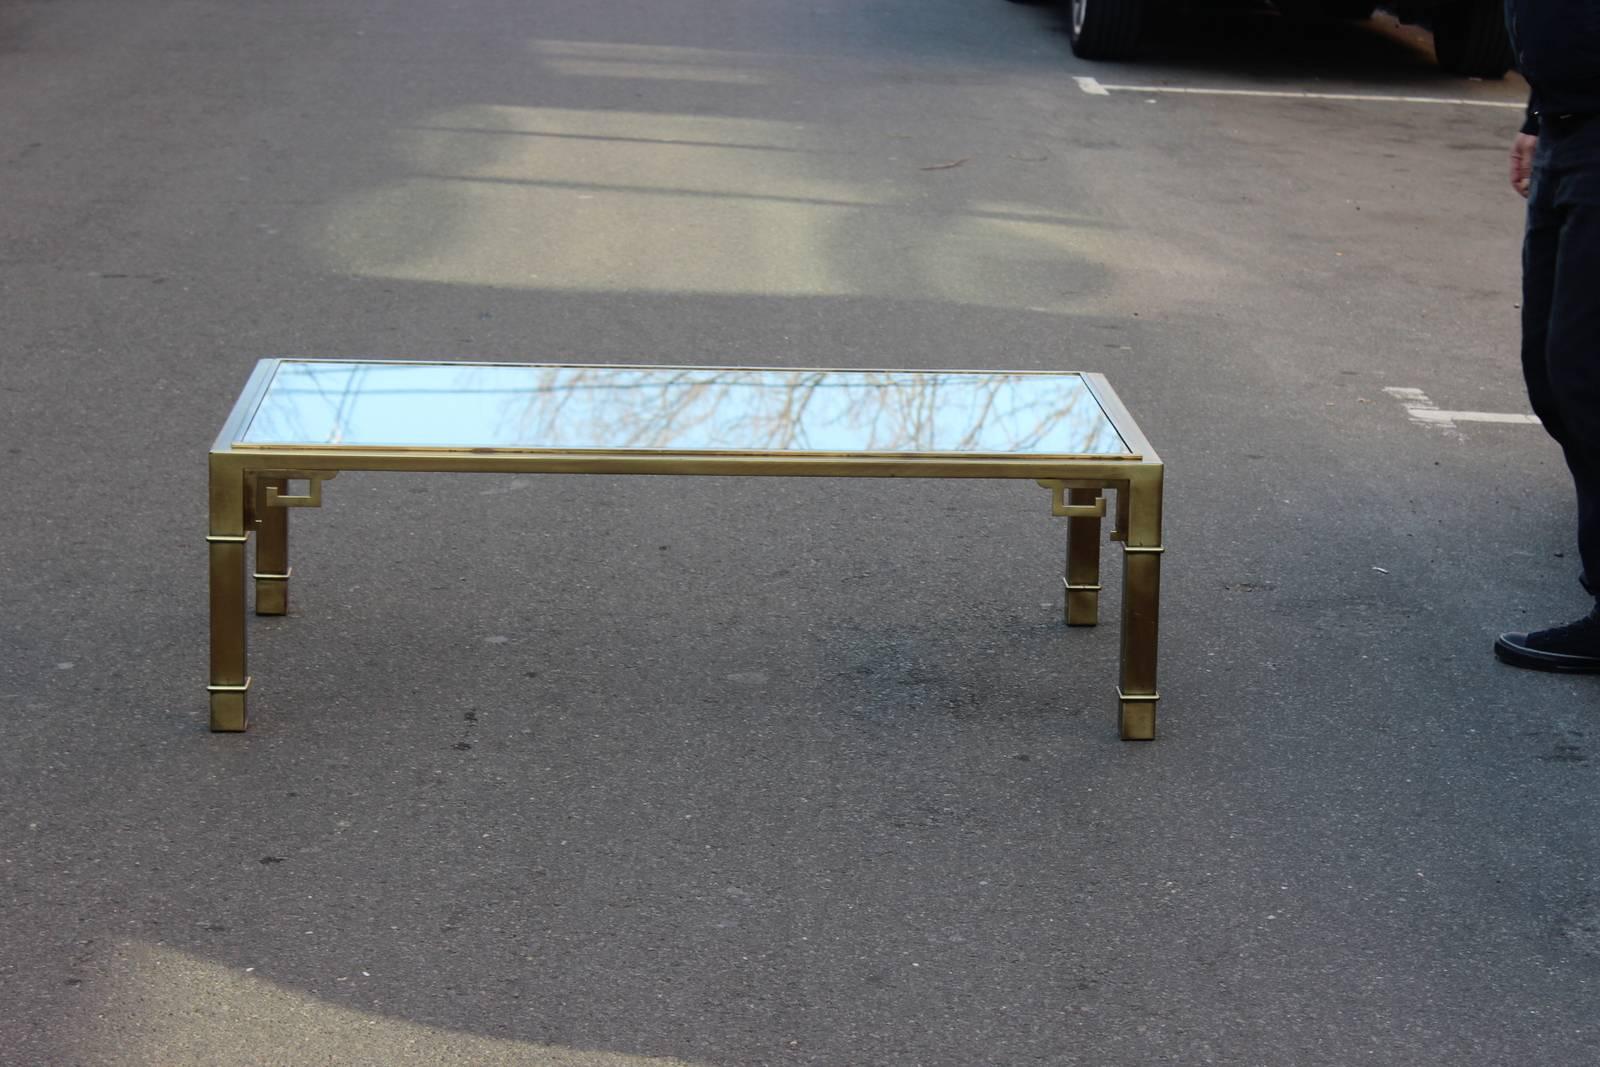 1970s Greek-key brass and glass cocktail table by Mastercraft. Original beveled glass top. Light wear to original glass.
  